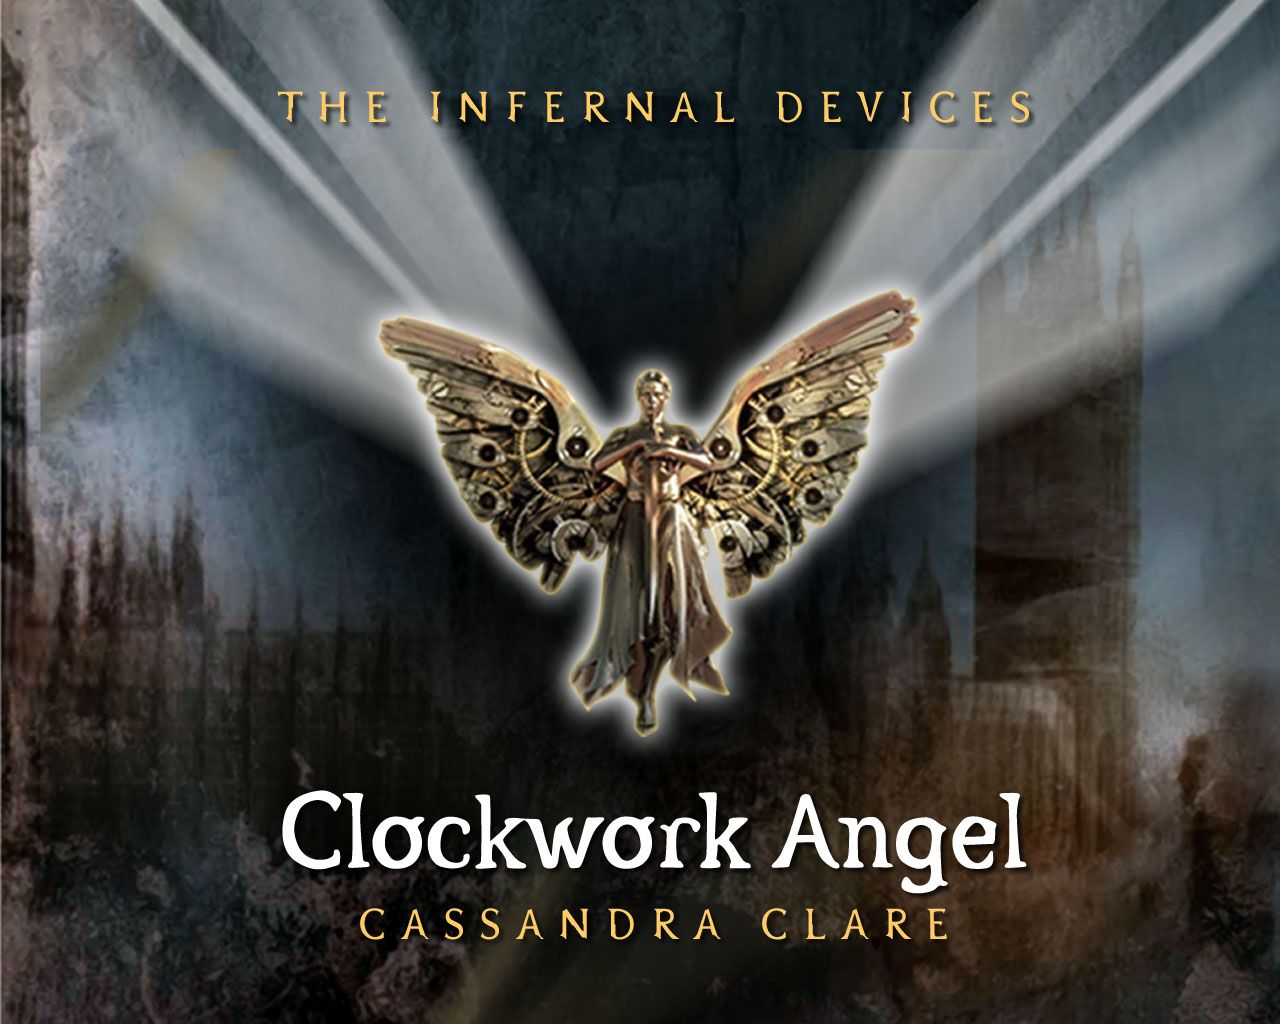 Clockwork Angel, The Infernal Devices Series, Reviews # Books Saturday